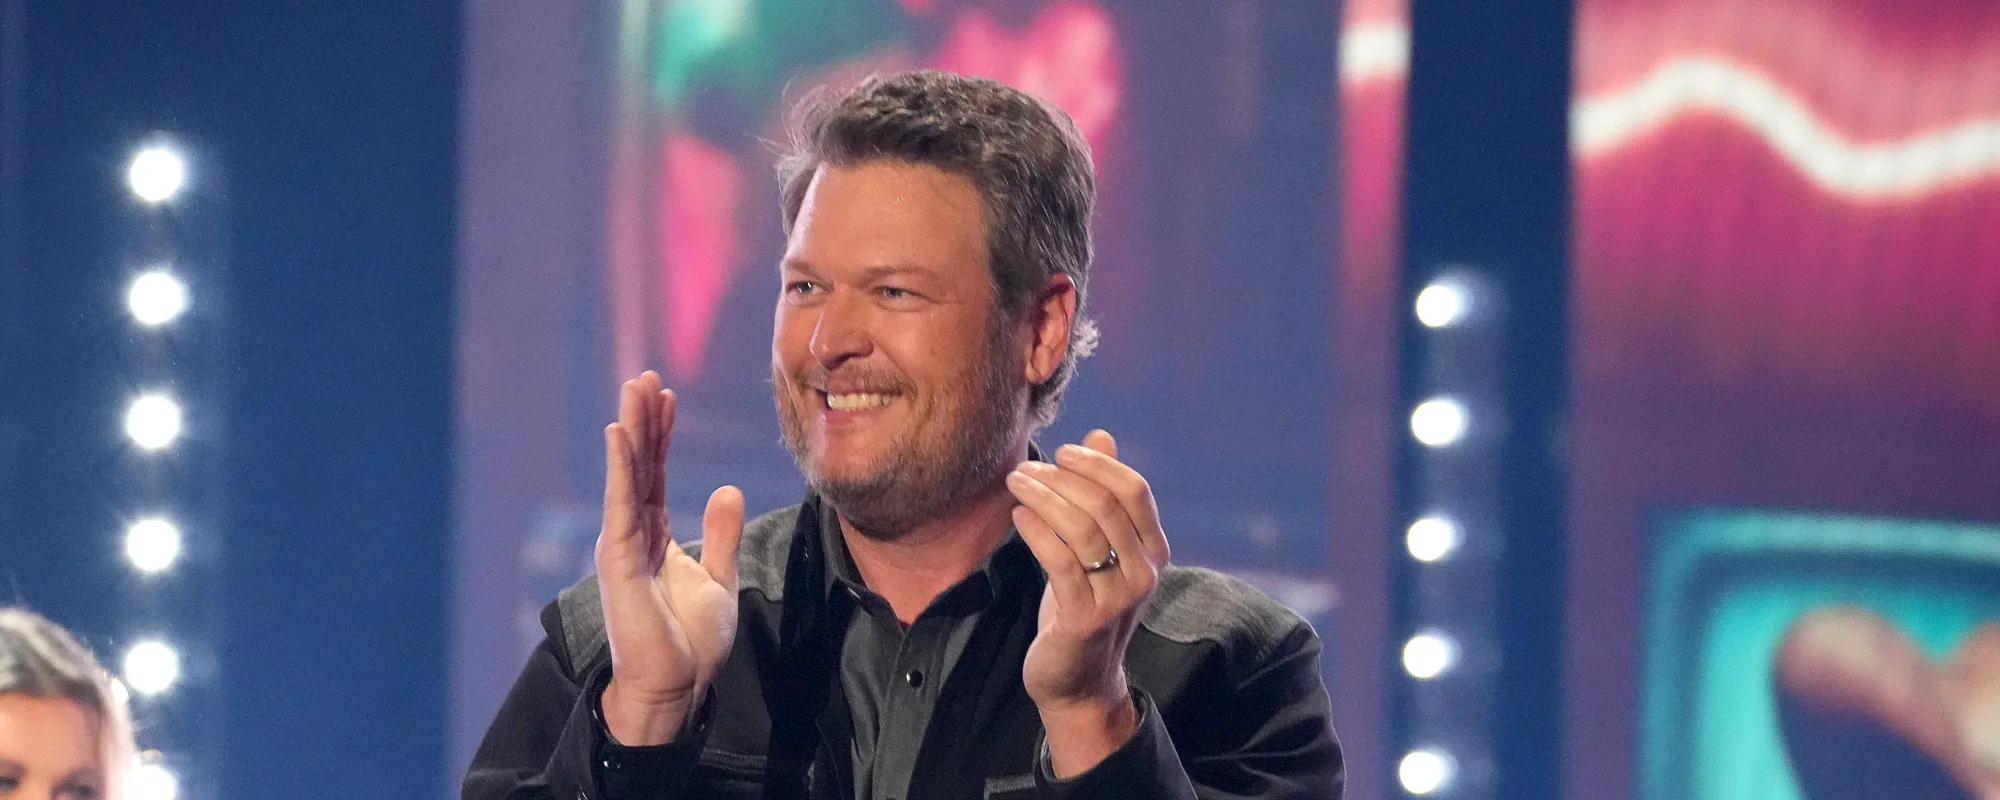 4 Songs You Didn’t Know Blake Shelton Wrote for Other Artists